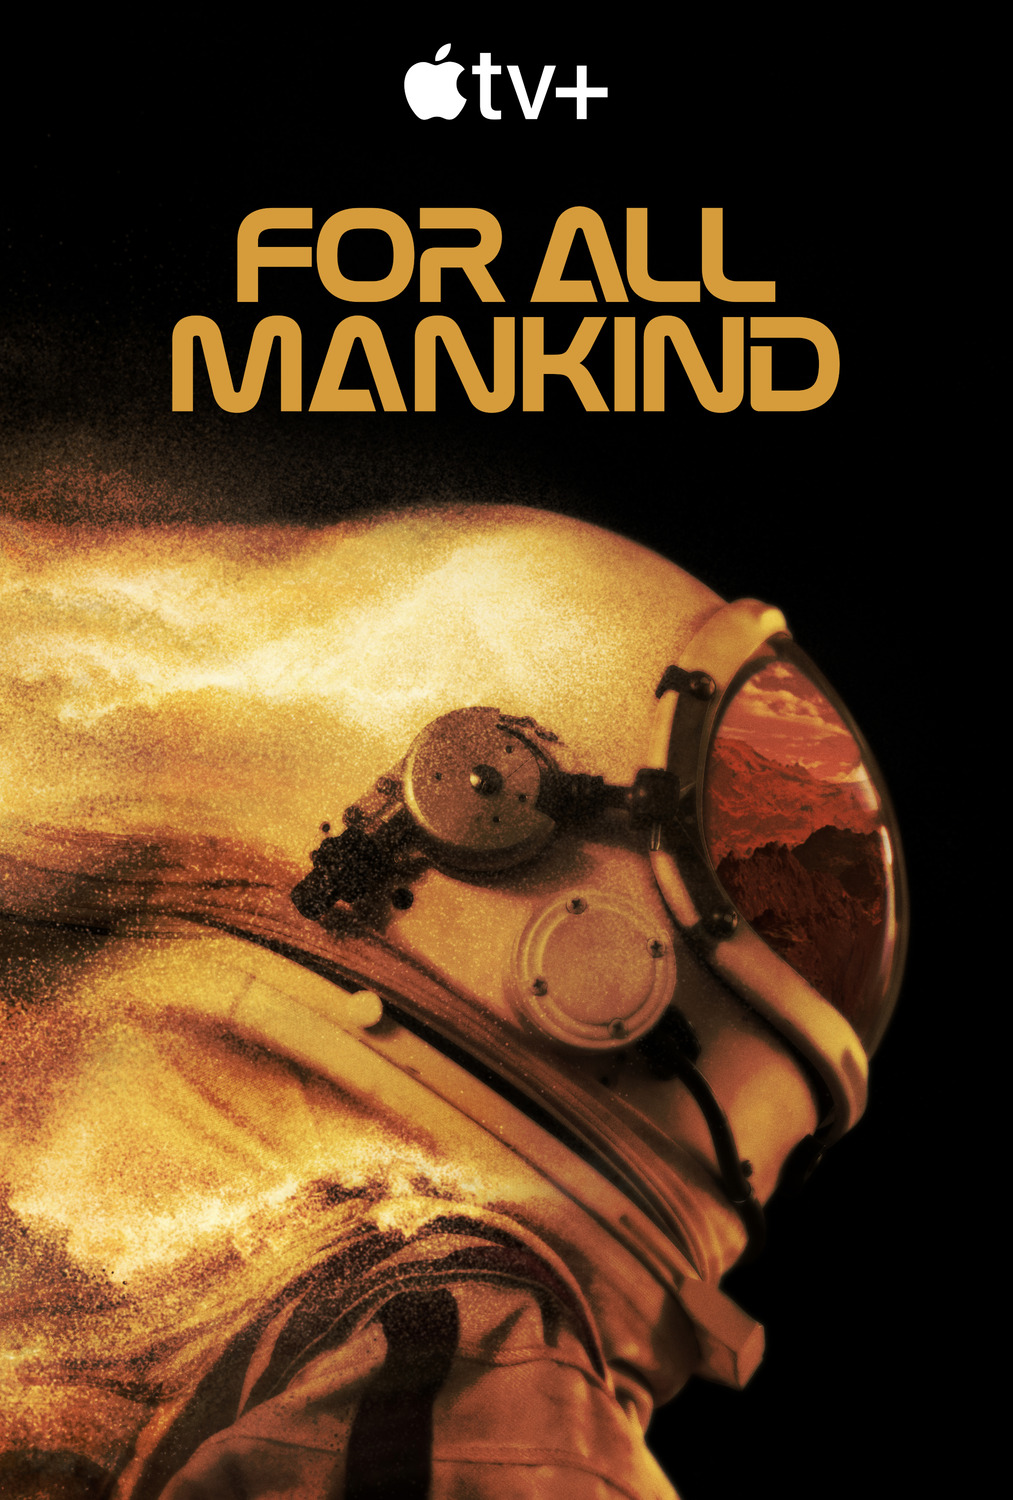 Extra Large Movie Poster Image for For All Mankind (#6 of 6)